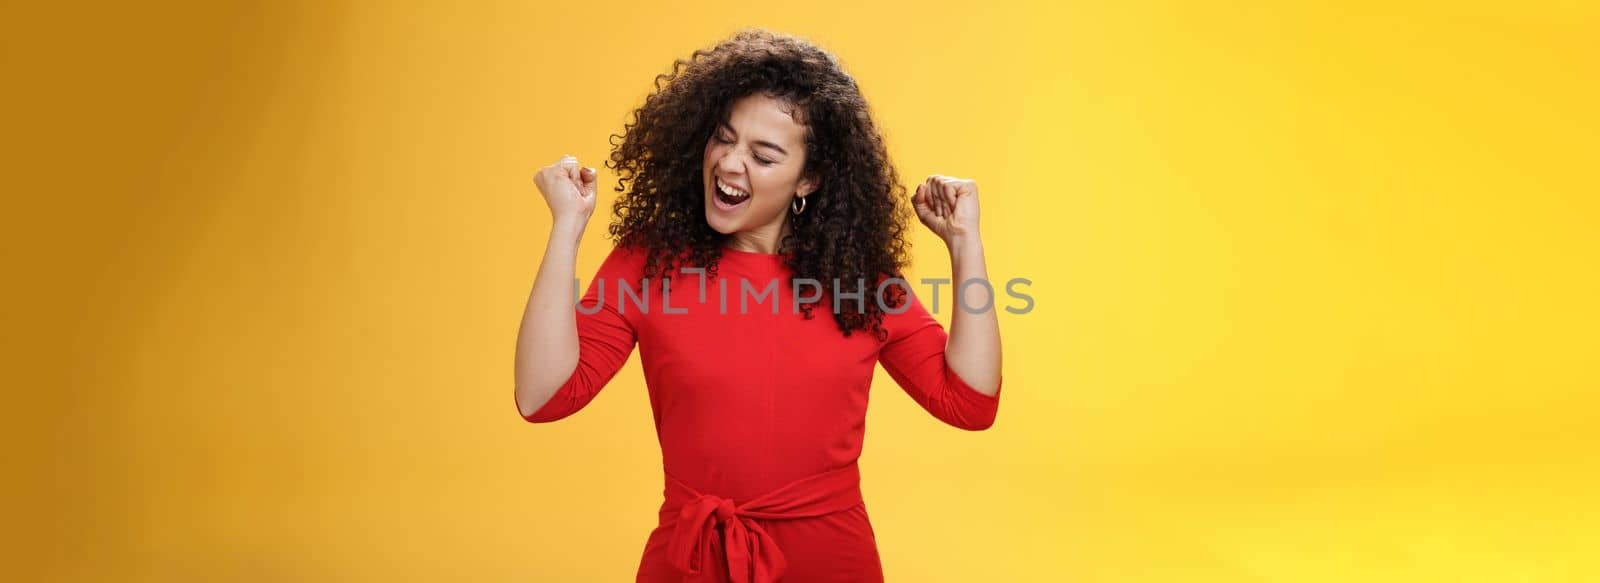 Lifestyle. Girl enjoying cool music feeling awesome as relaxing at party dancing and feeling awesome raising clenched fists saying yeah turning head joyfully with closed eyes having fun over yellow background.